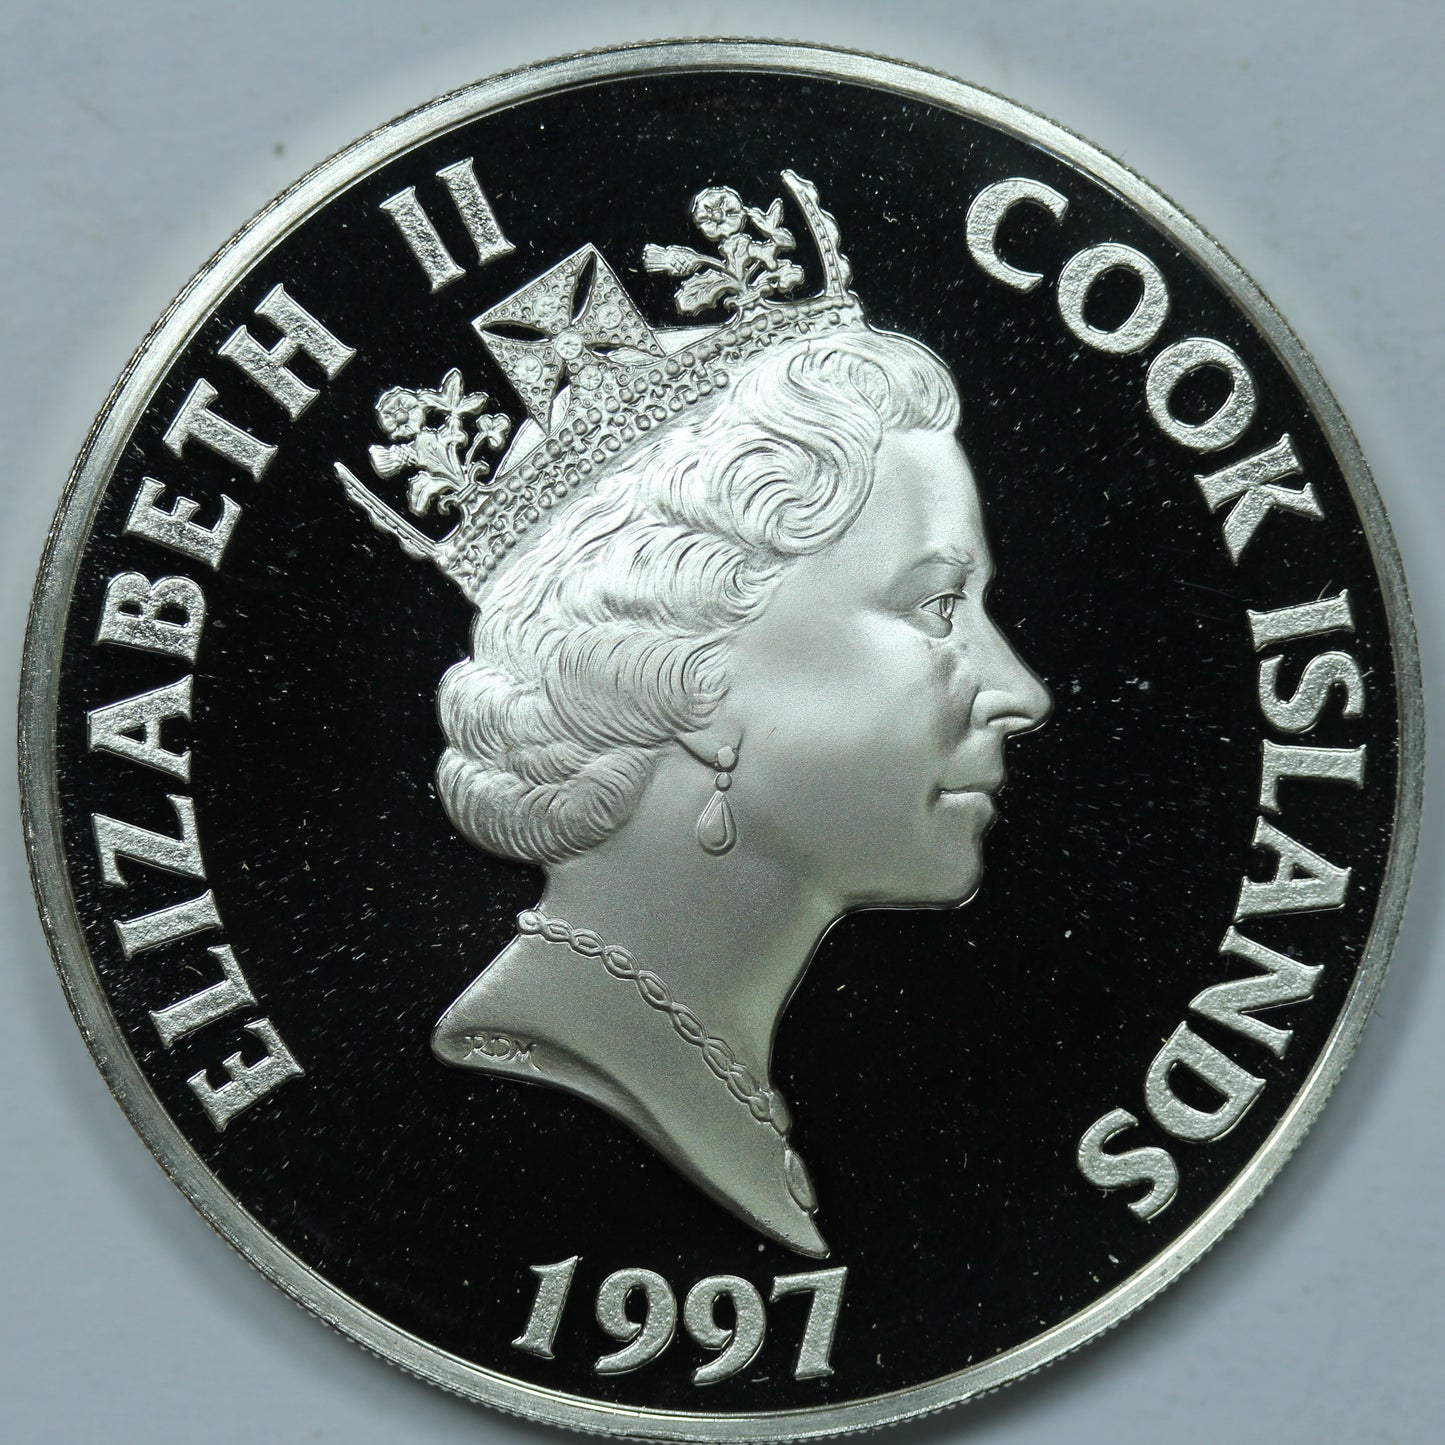 1997 Cook Islands $50 Sterling Silver Proof Christopher Columbus w/ Capsule